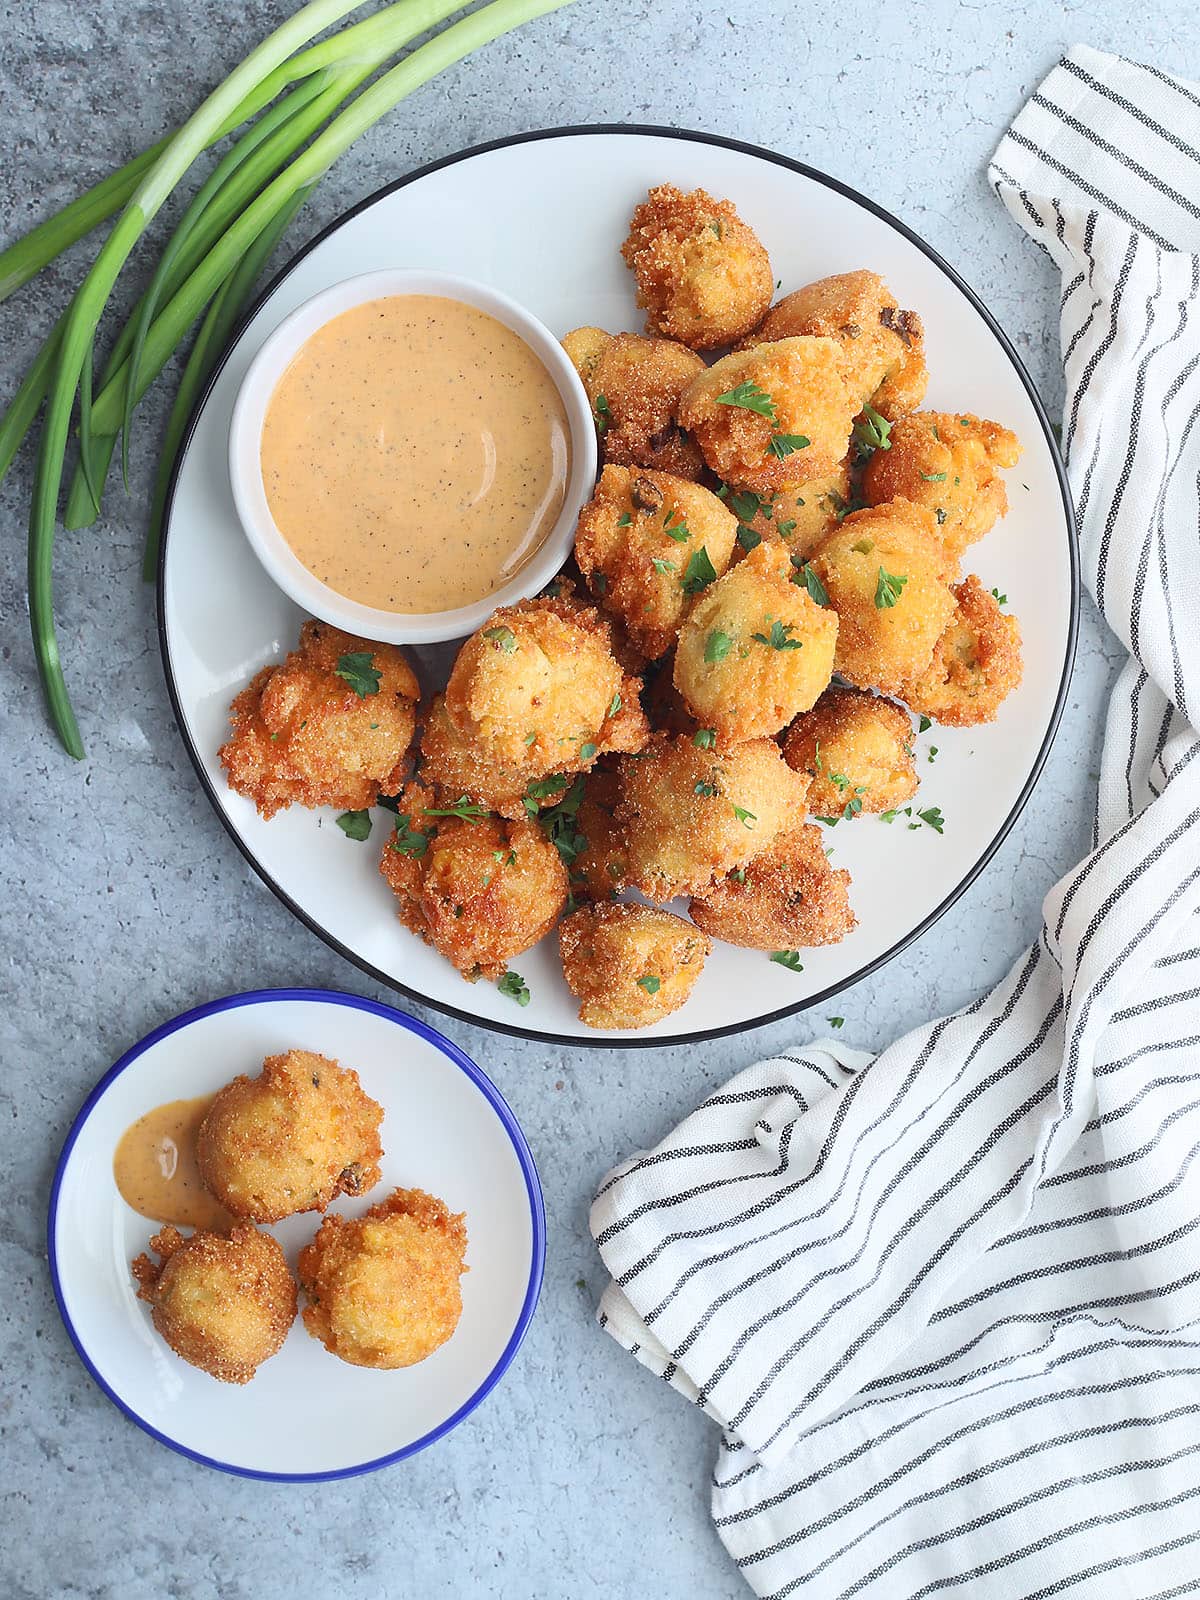 Homemade Hush Puppies Recipe - Southern Kissed